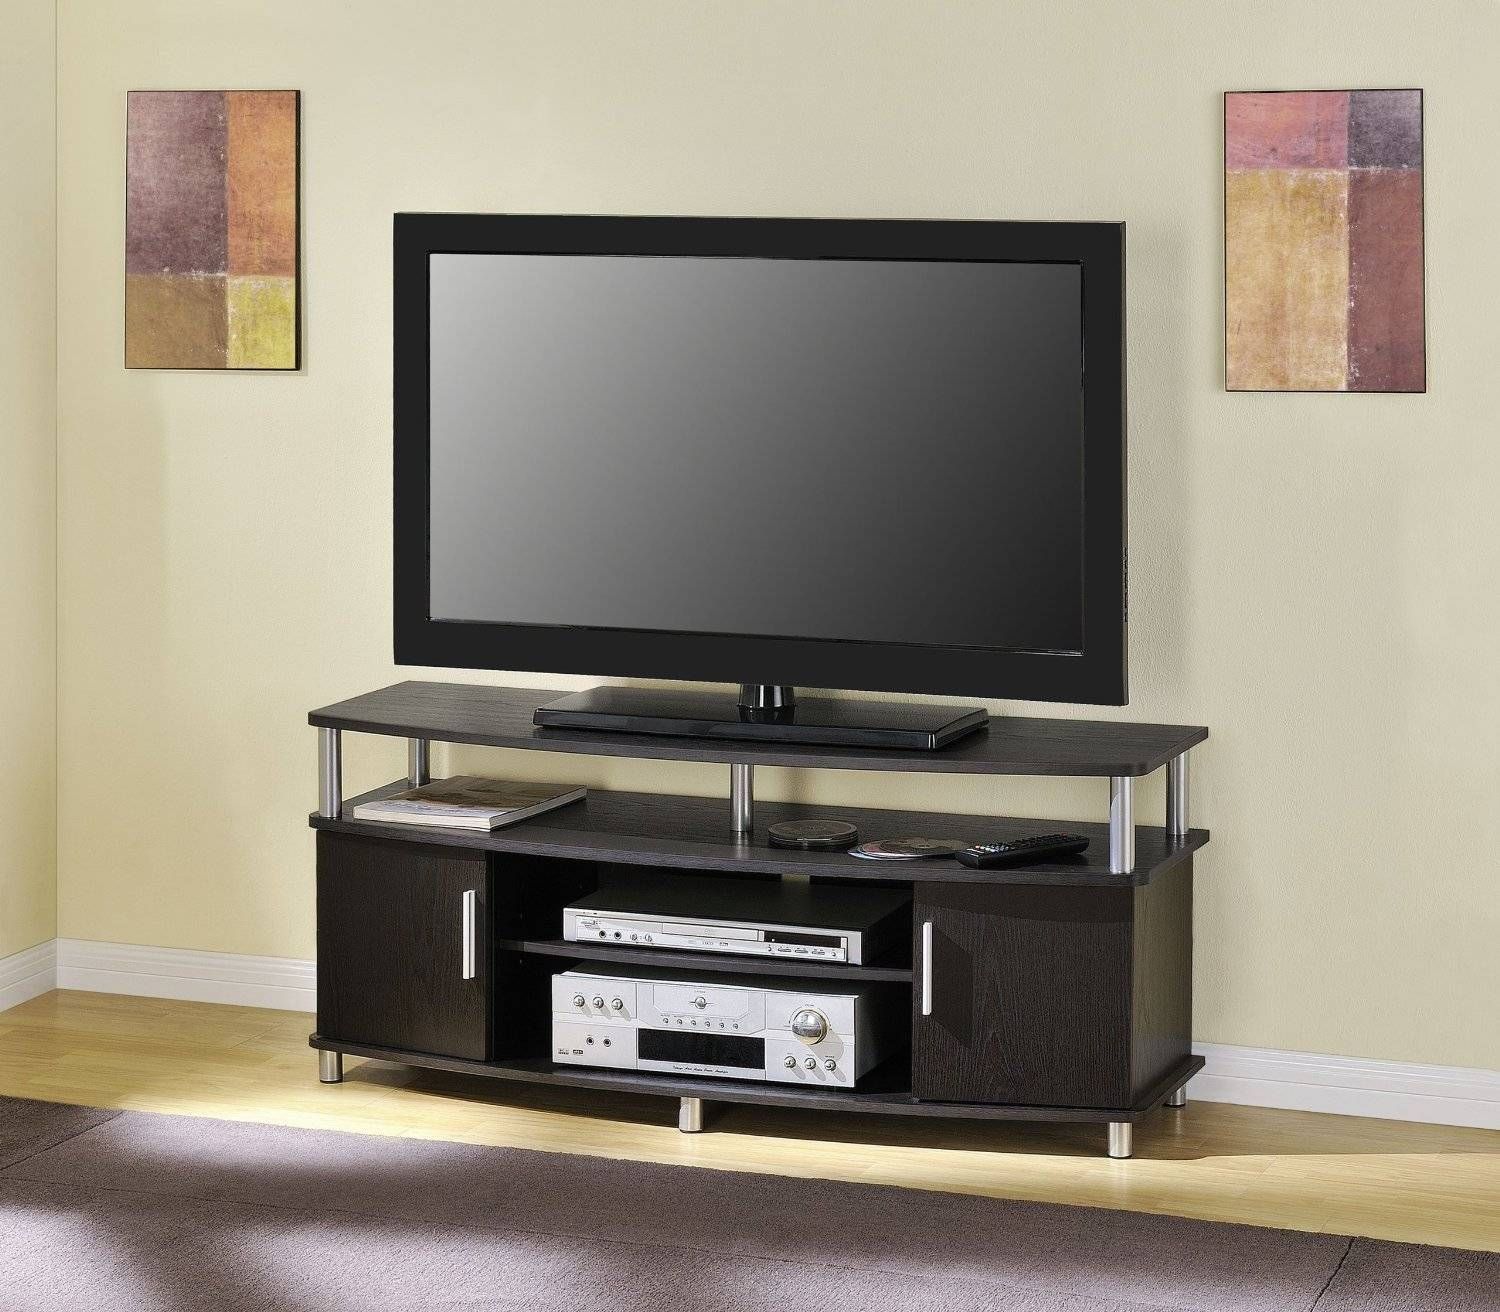 Small Tv Stand For Bedroom | Delmaegypt Throughout Tv Stands For Small Rooms (View 14 of 15)